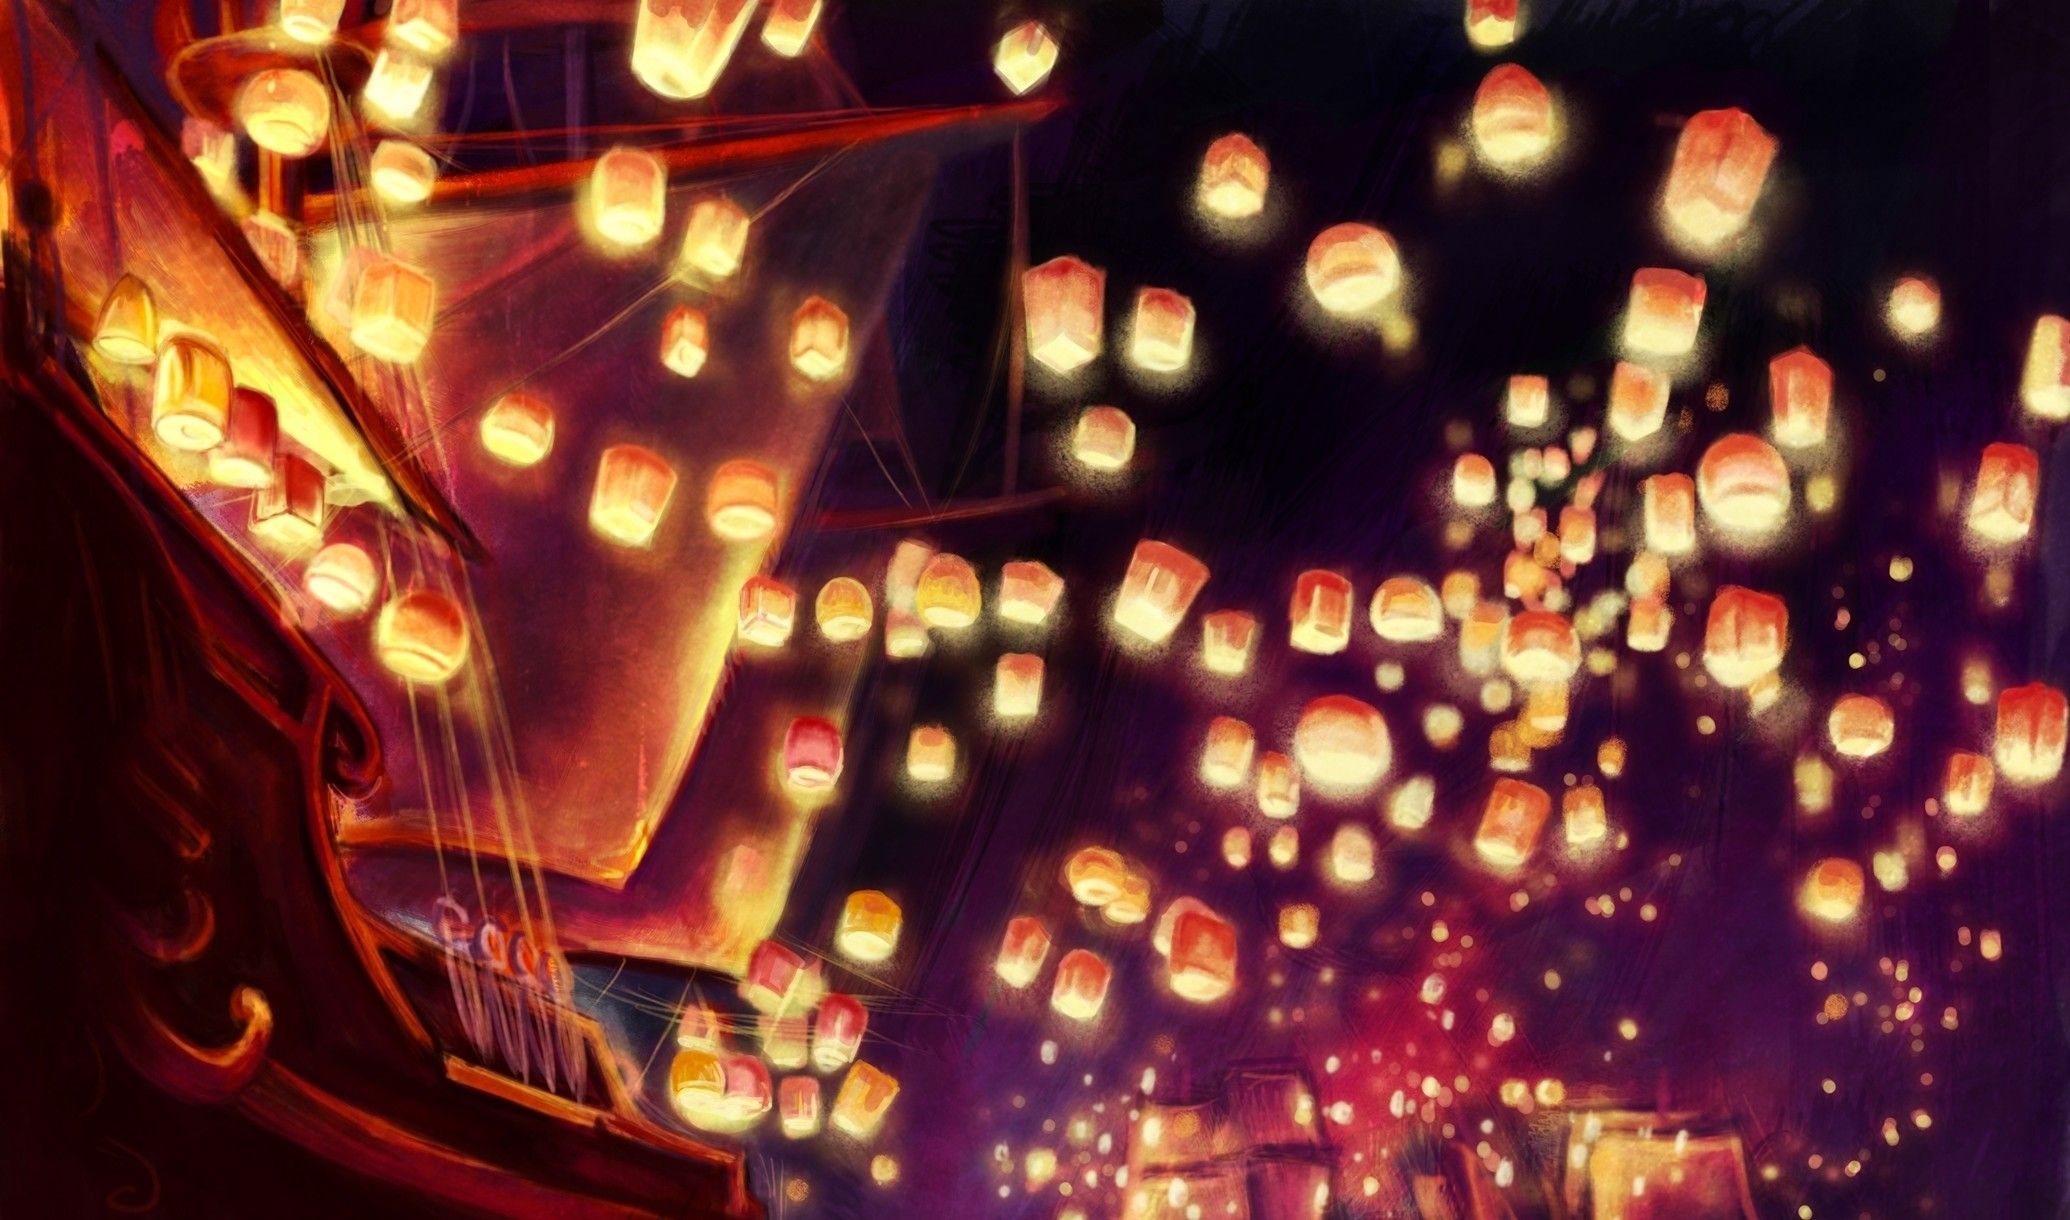 A painting of people flying lanterns in the night - Rapunzel